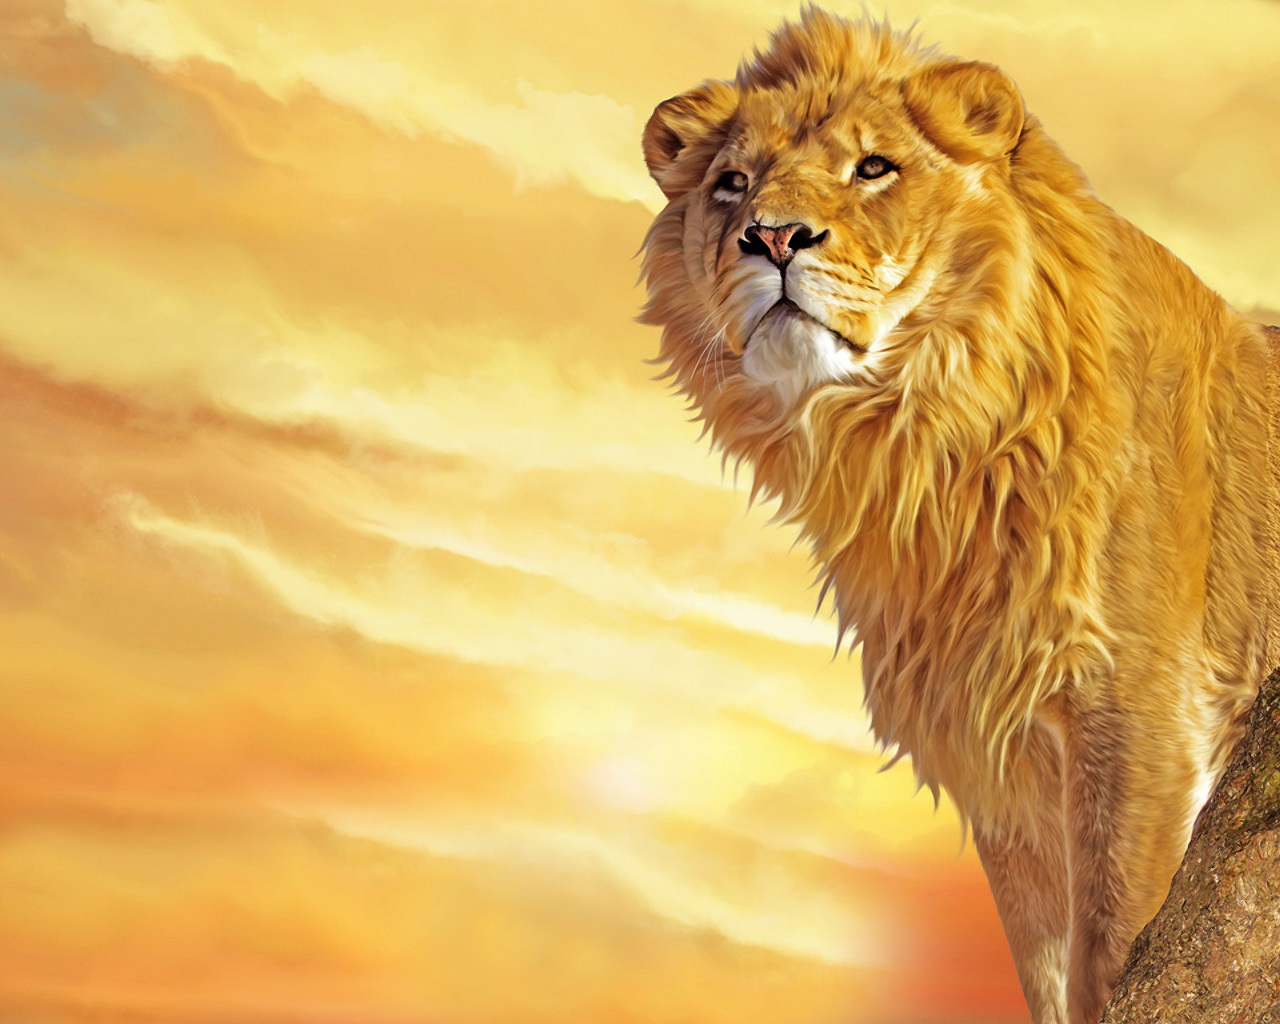 Download full size Lions wallpaper / Animals / 1280x1024